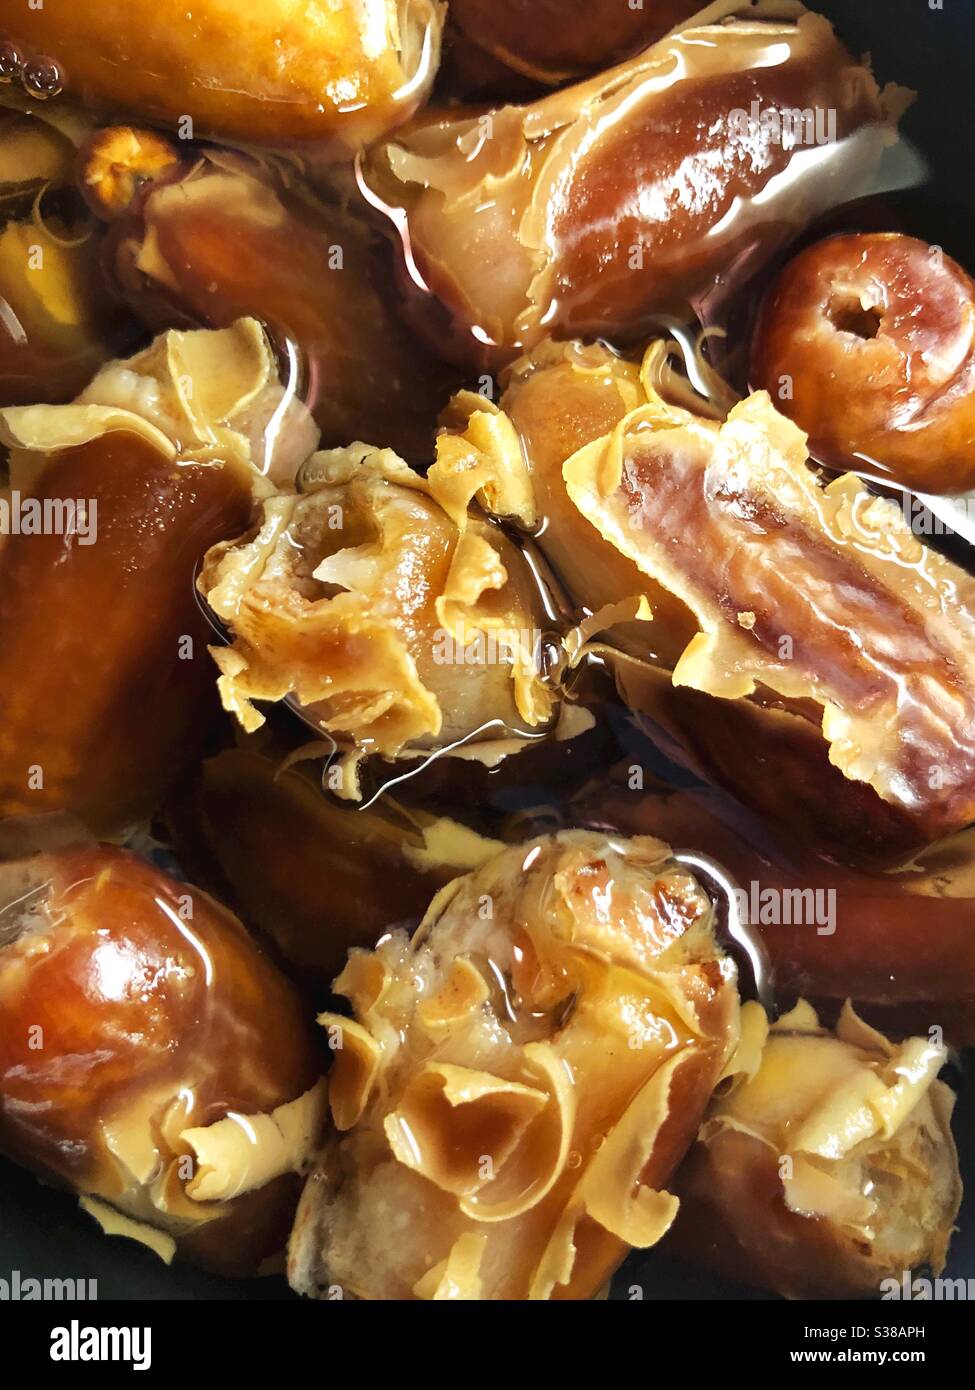 Dates soaking in hot water in preparation to make date syrup. Stock Photo